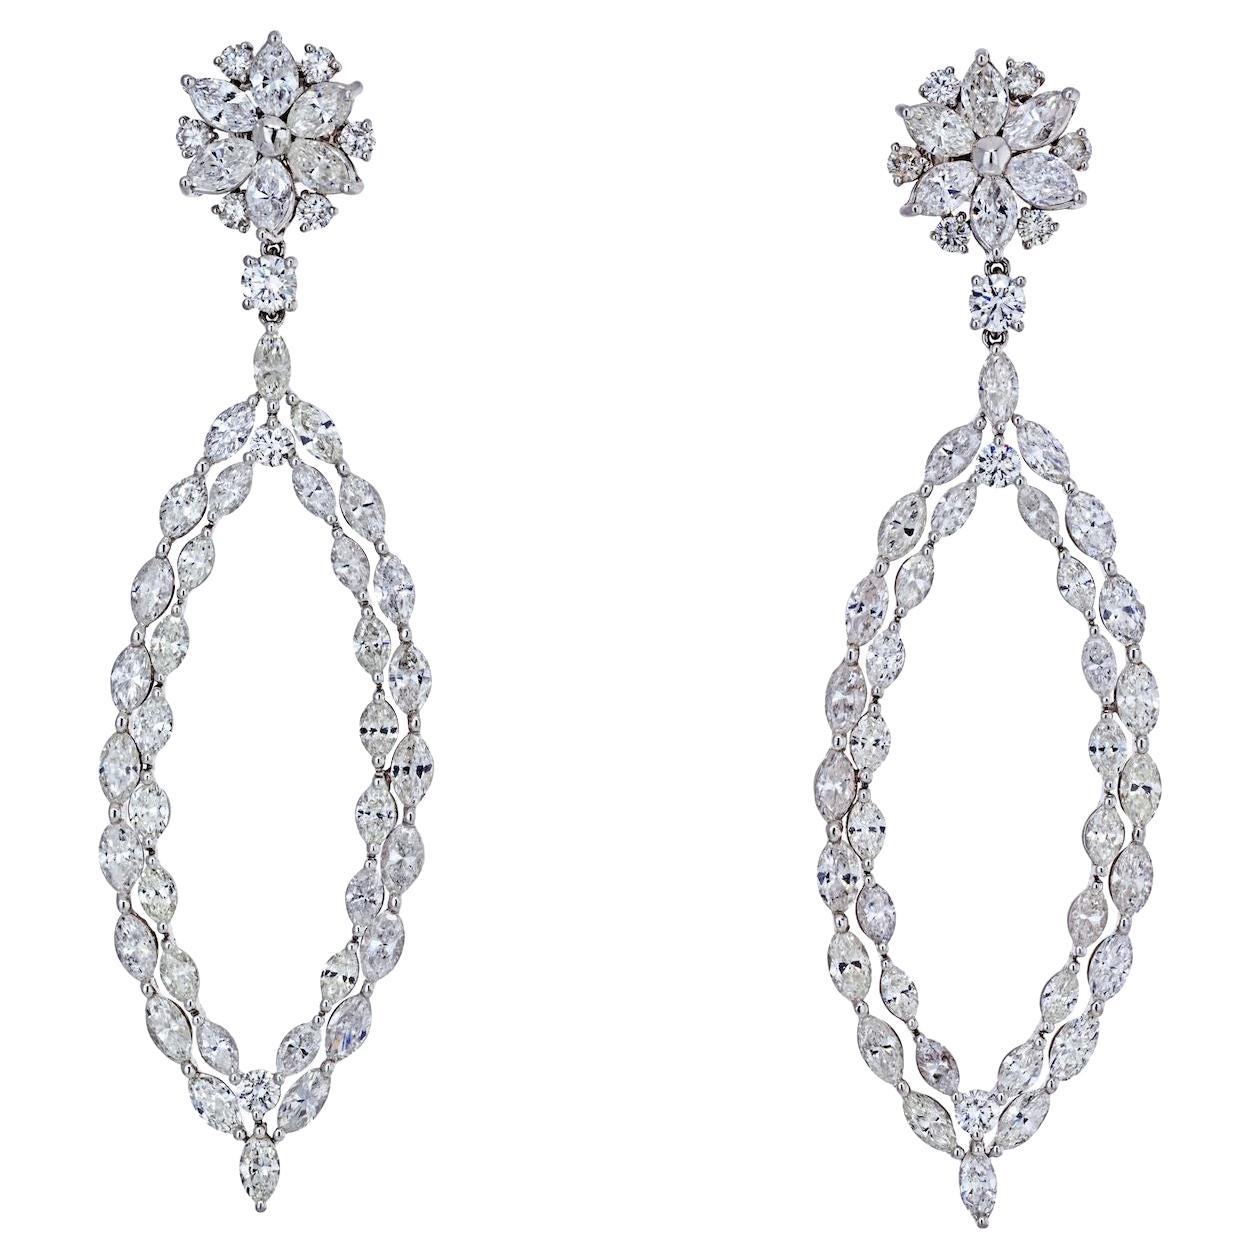 16 Carat Dangling Round and Marquise Cut Diamond Earrings